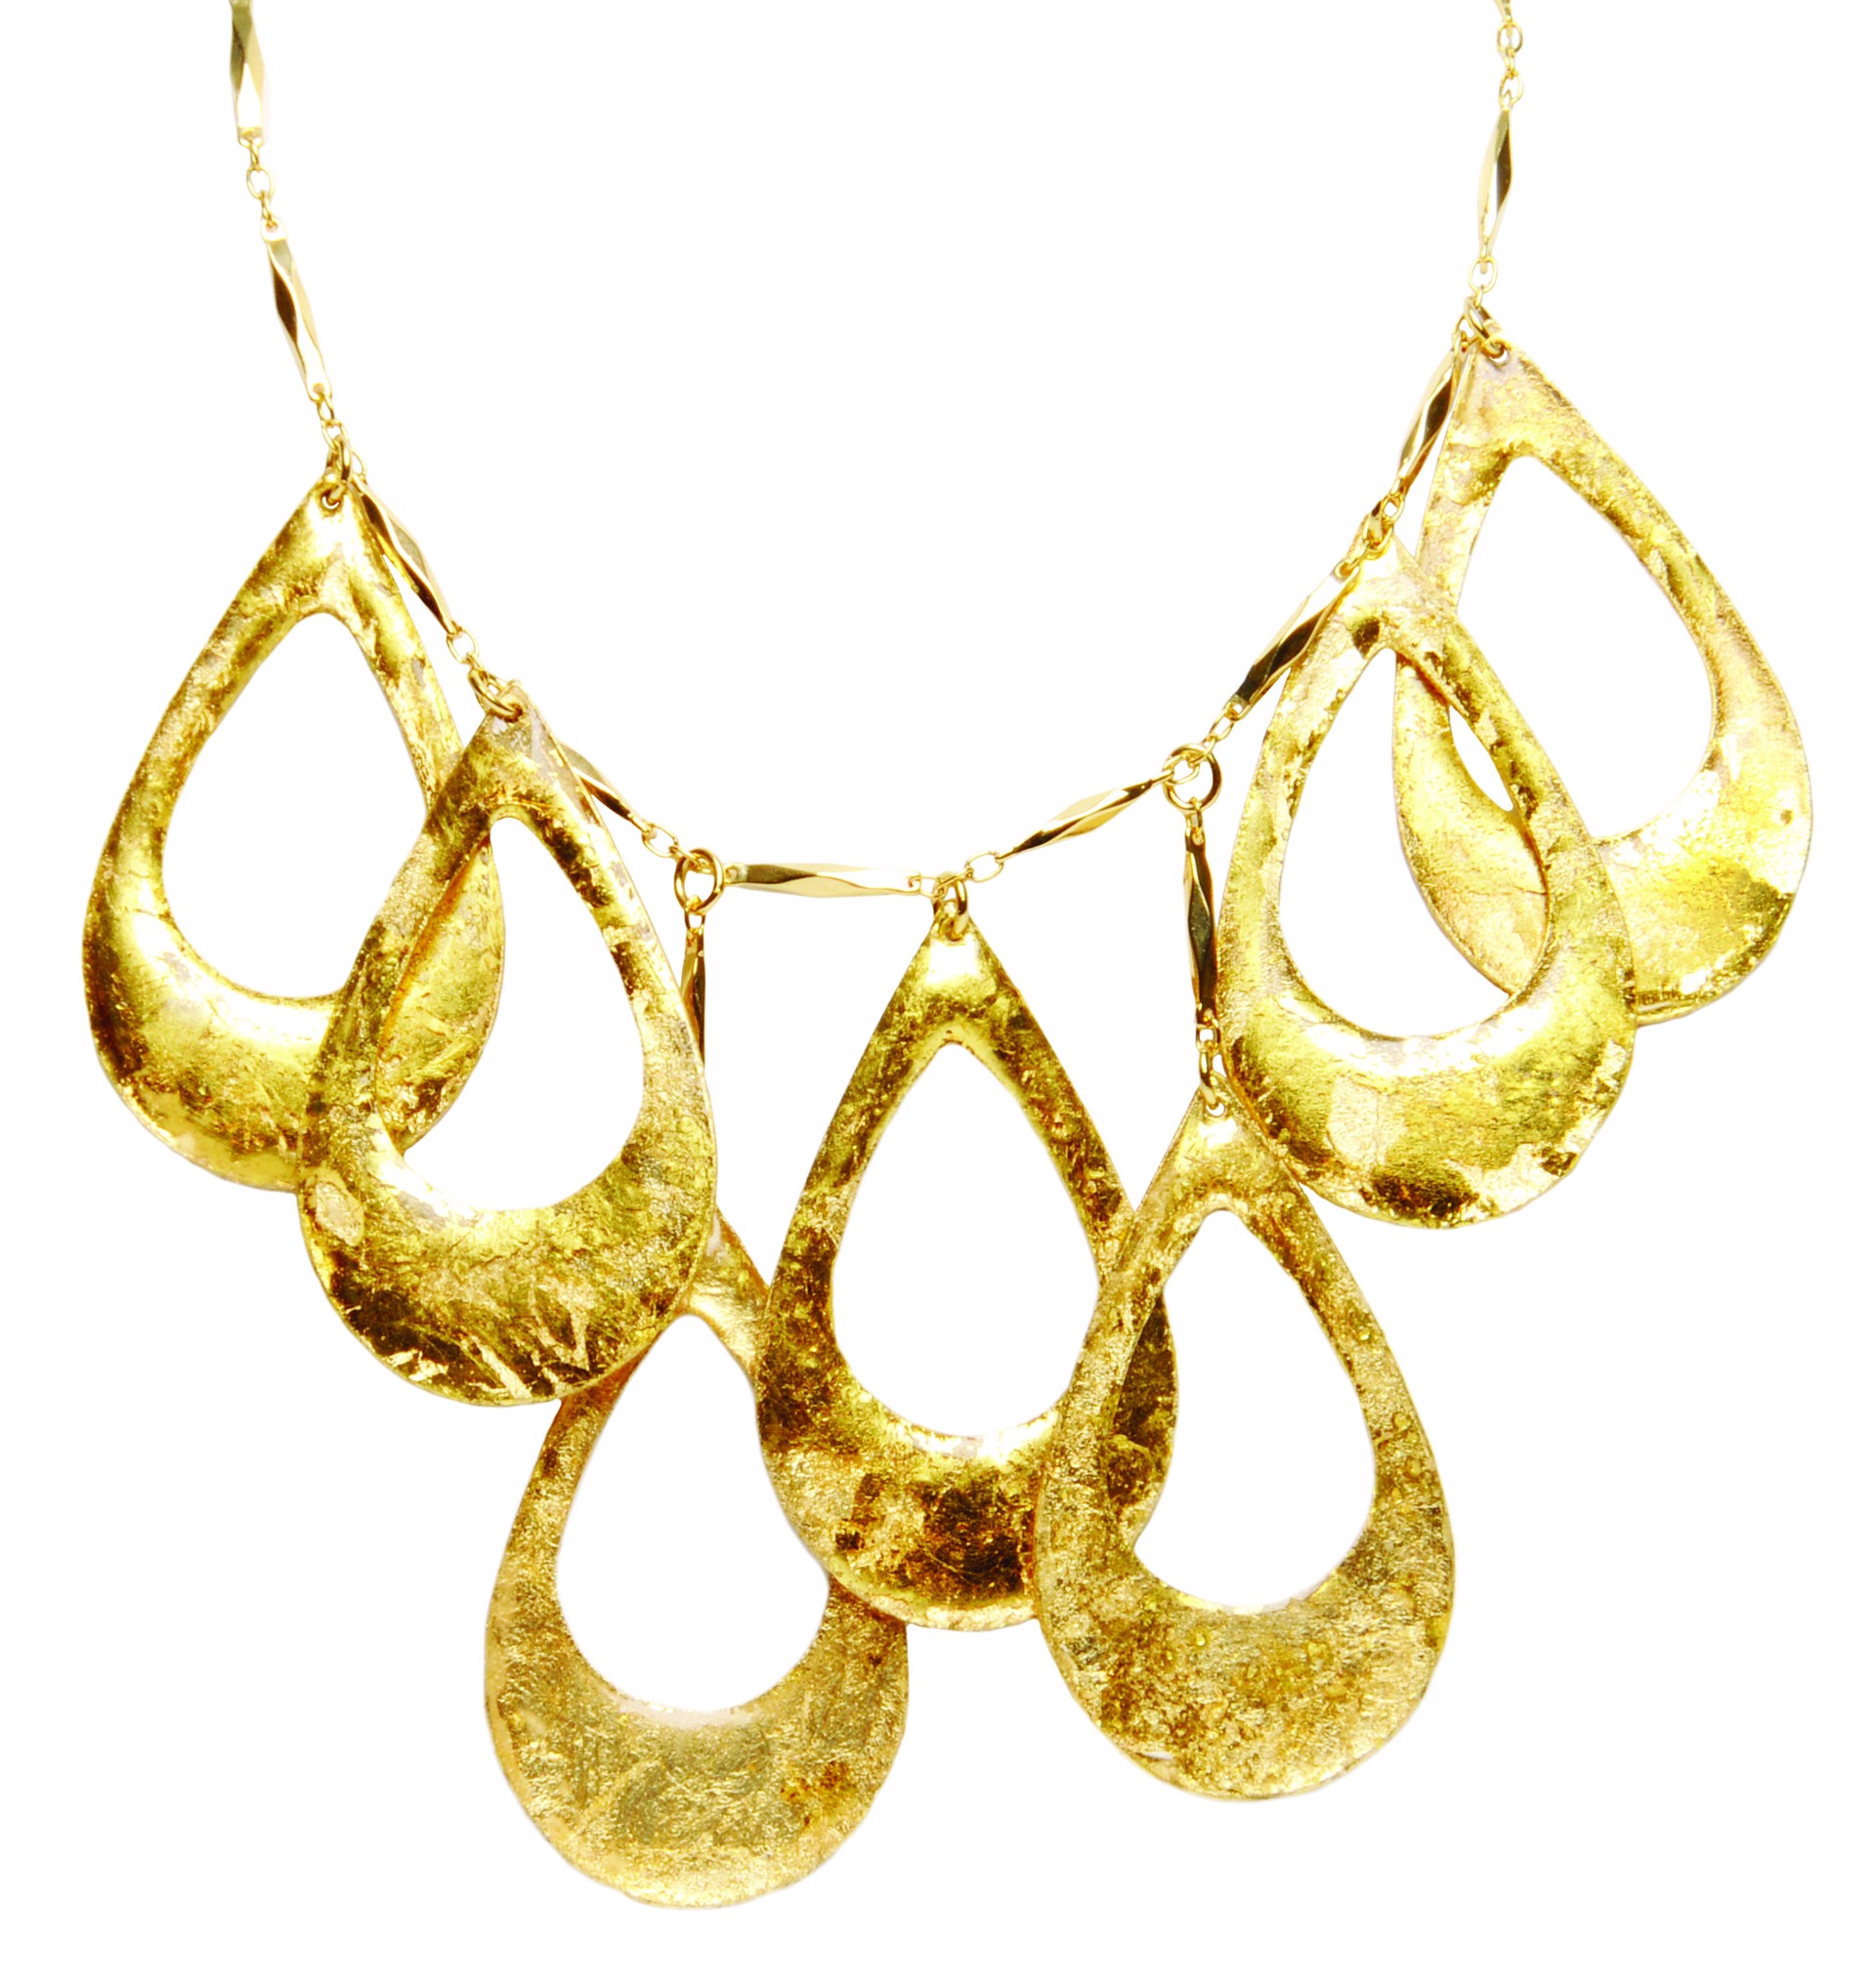 Athena Gold Necklace by Evocateur